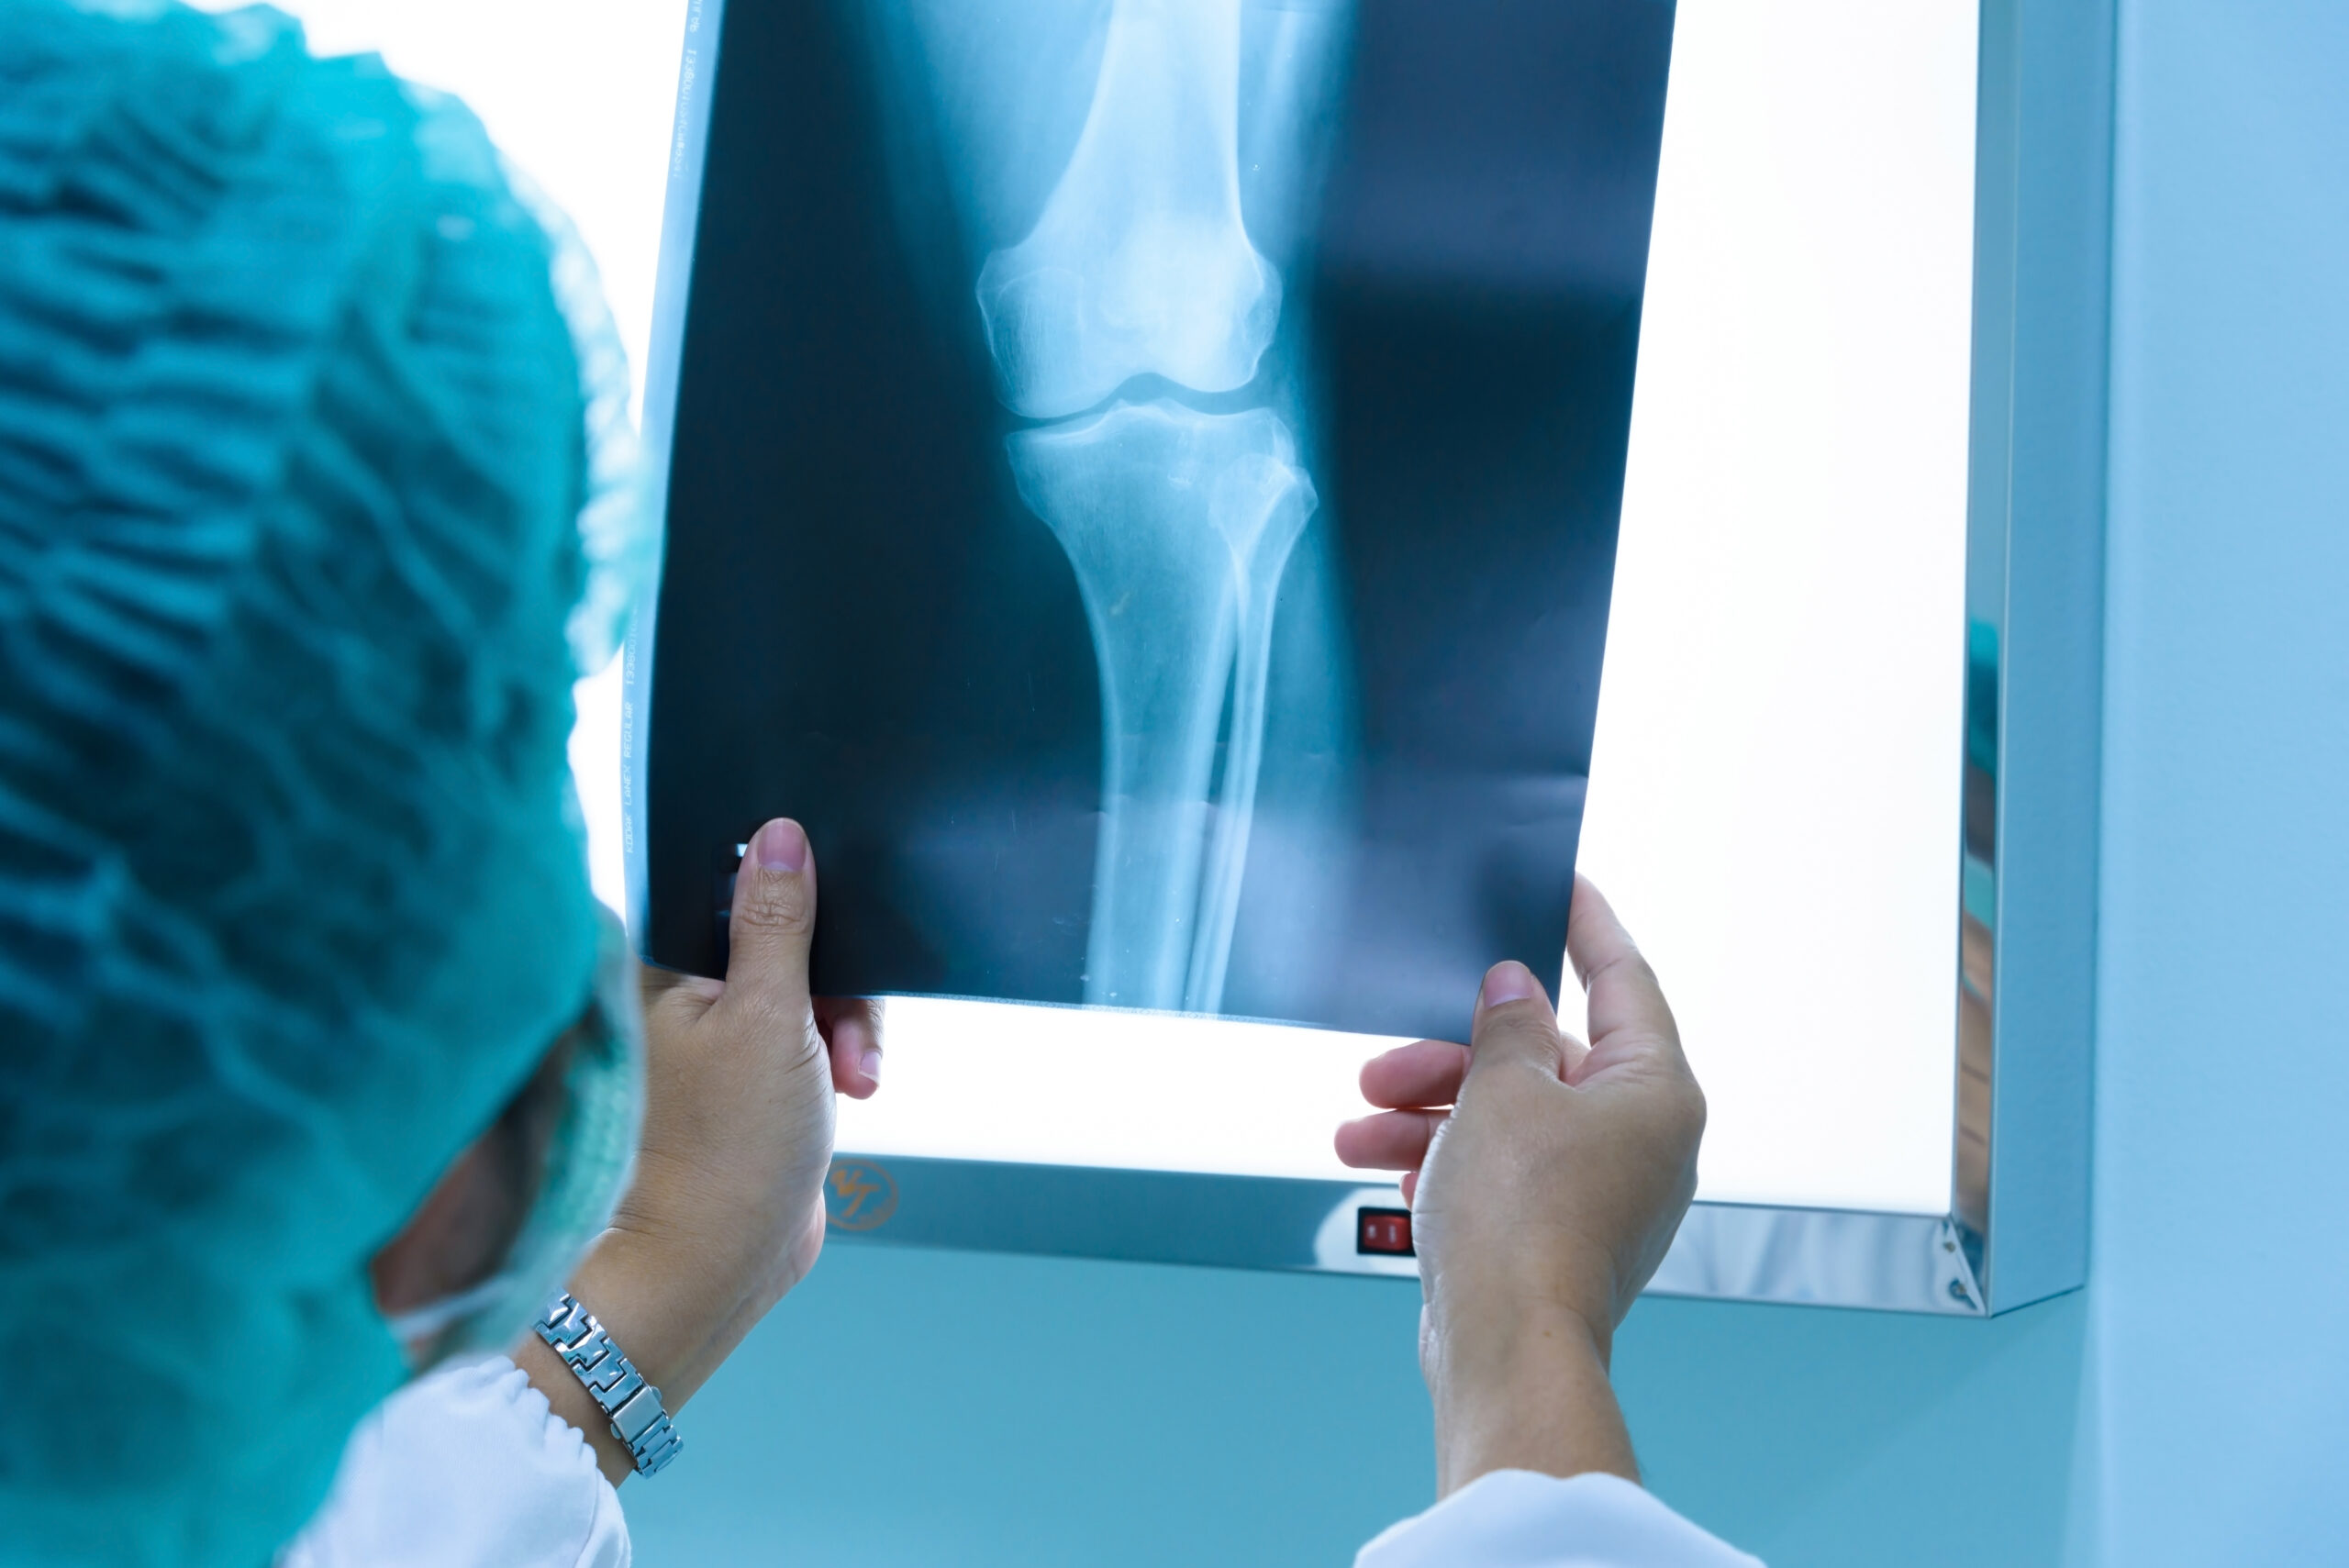 Imaging specialist reviewing X-ray image of leg